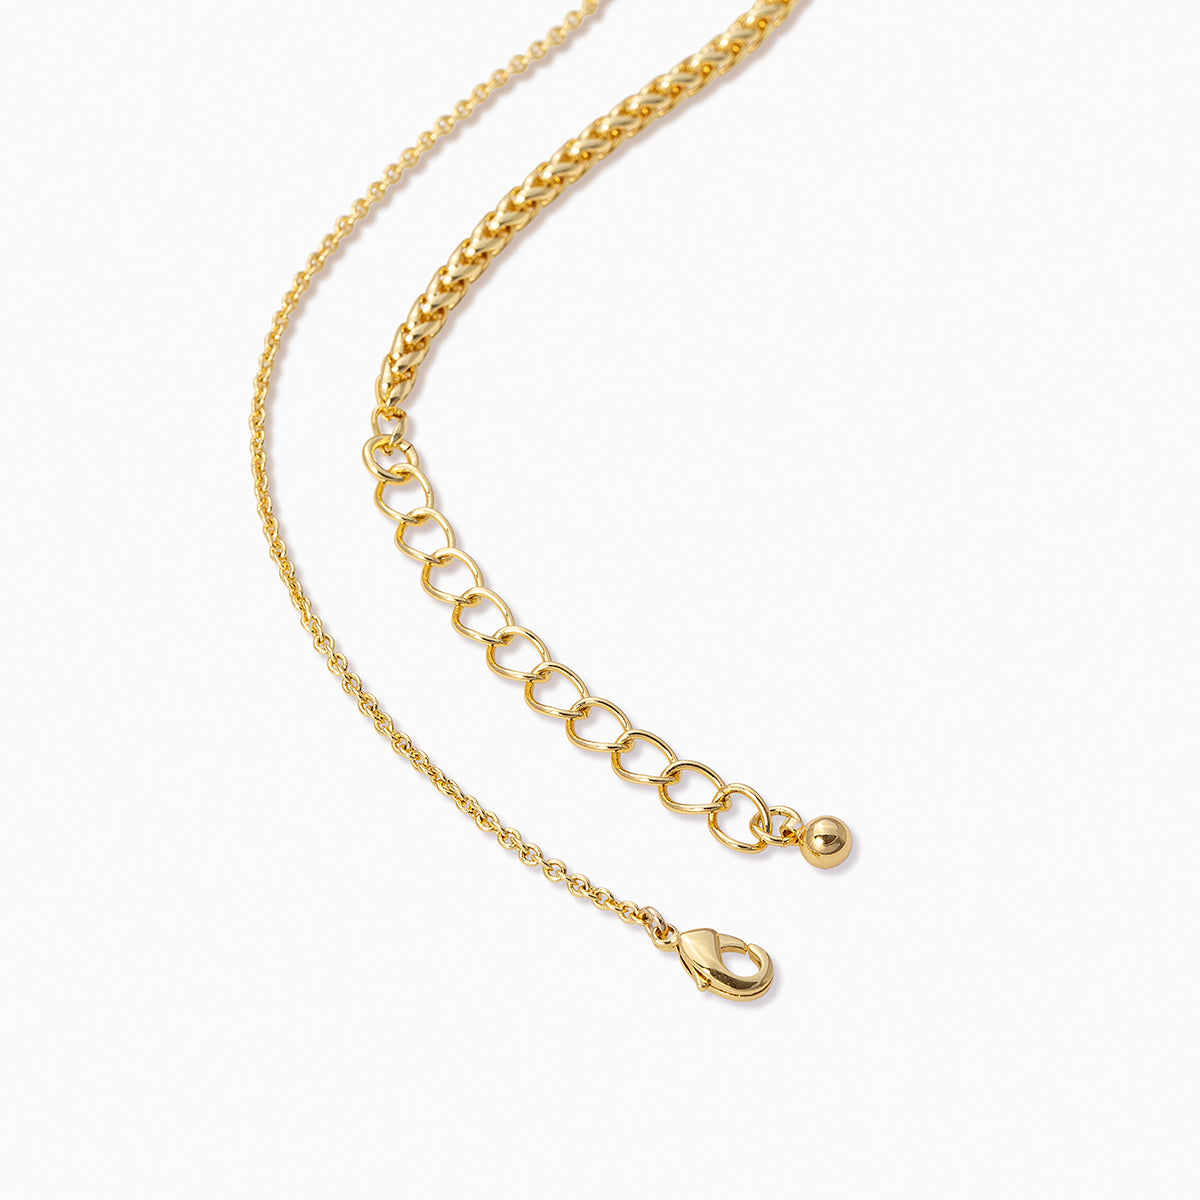 How to shorten a chain without cutting it 🚫✂️ #jewelry